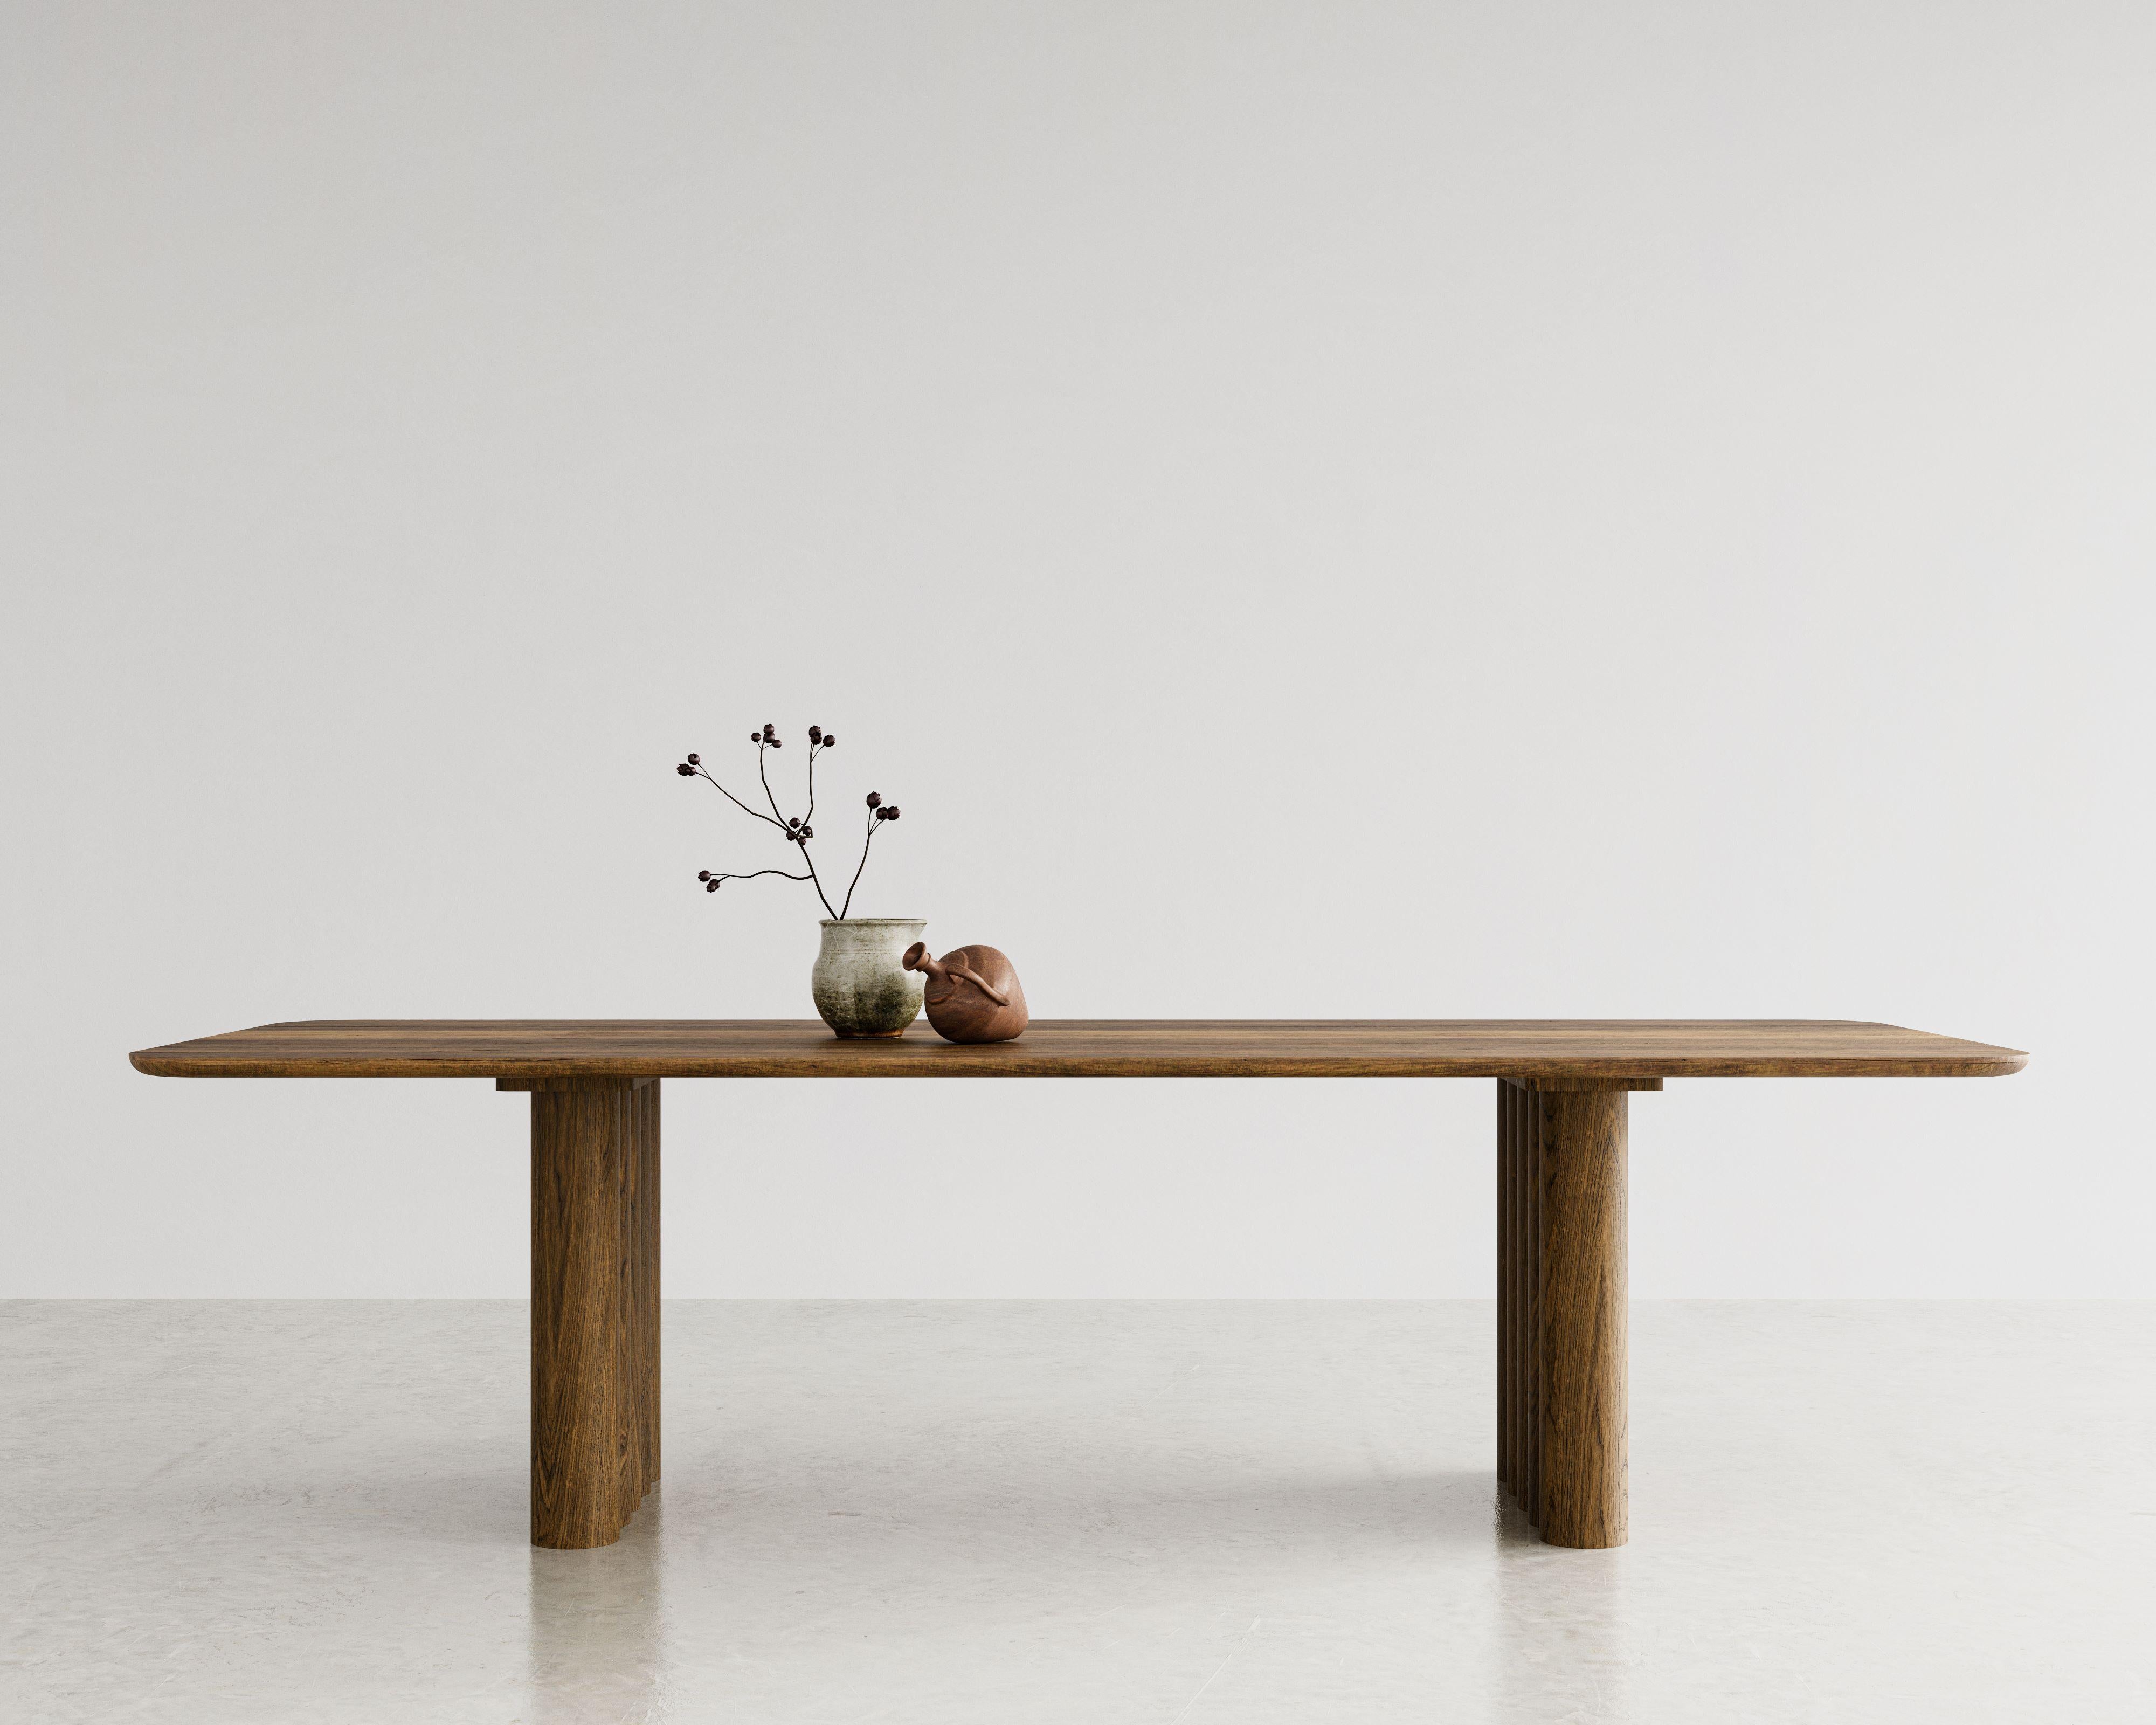 PLUSH dining table, rectangular table top, 270 cm.
Solid wood table top and legs. Handmade in Denmark. 
Signed by Jacob Plejdrup for DK3

Table's height: 72 or 74 cm
Sold model: 
Smoked Oak
Legs Thickness: 130 mm
Table top Thickness: 30 mm

Table